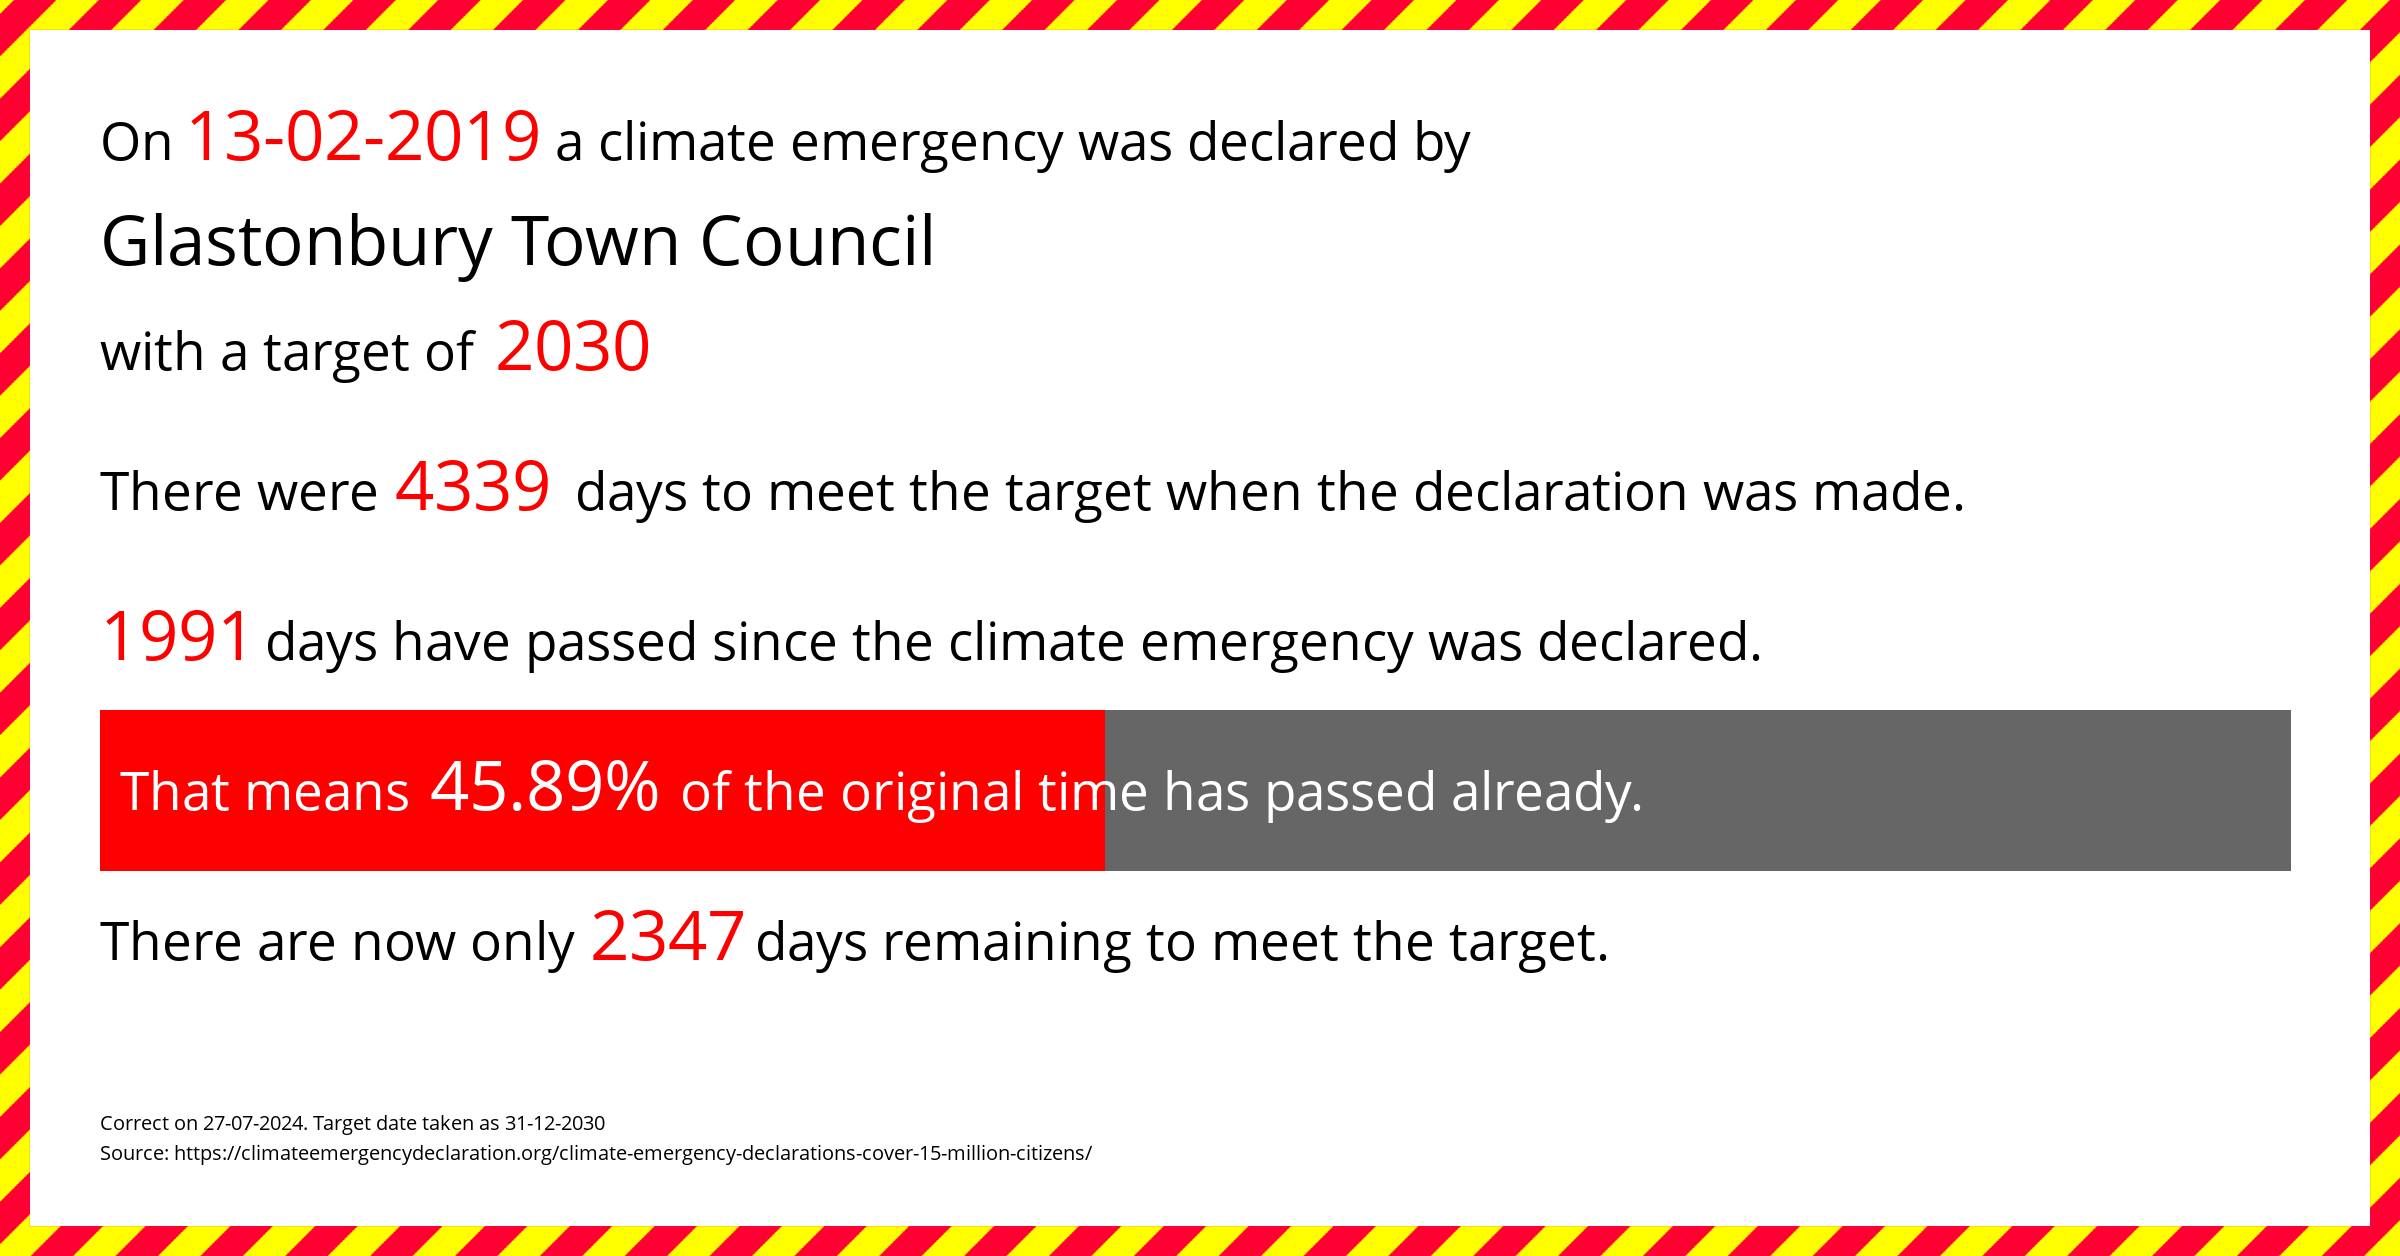 Glastonbury Town Council declared a Climate emergency on Wednesday 13th February 2019, with a target of 2030.